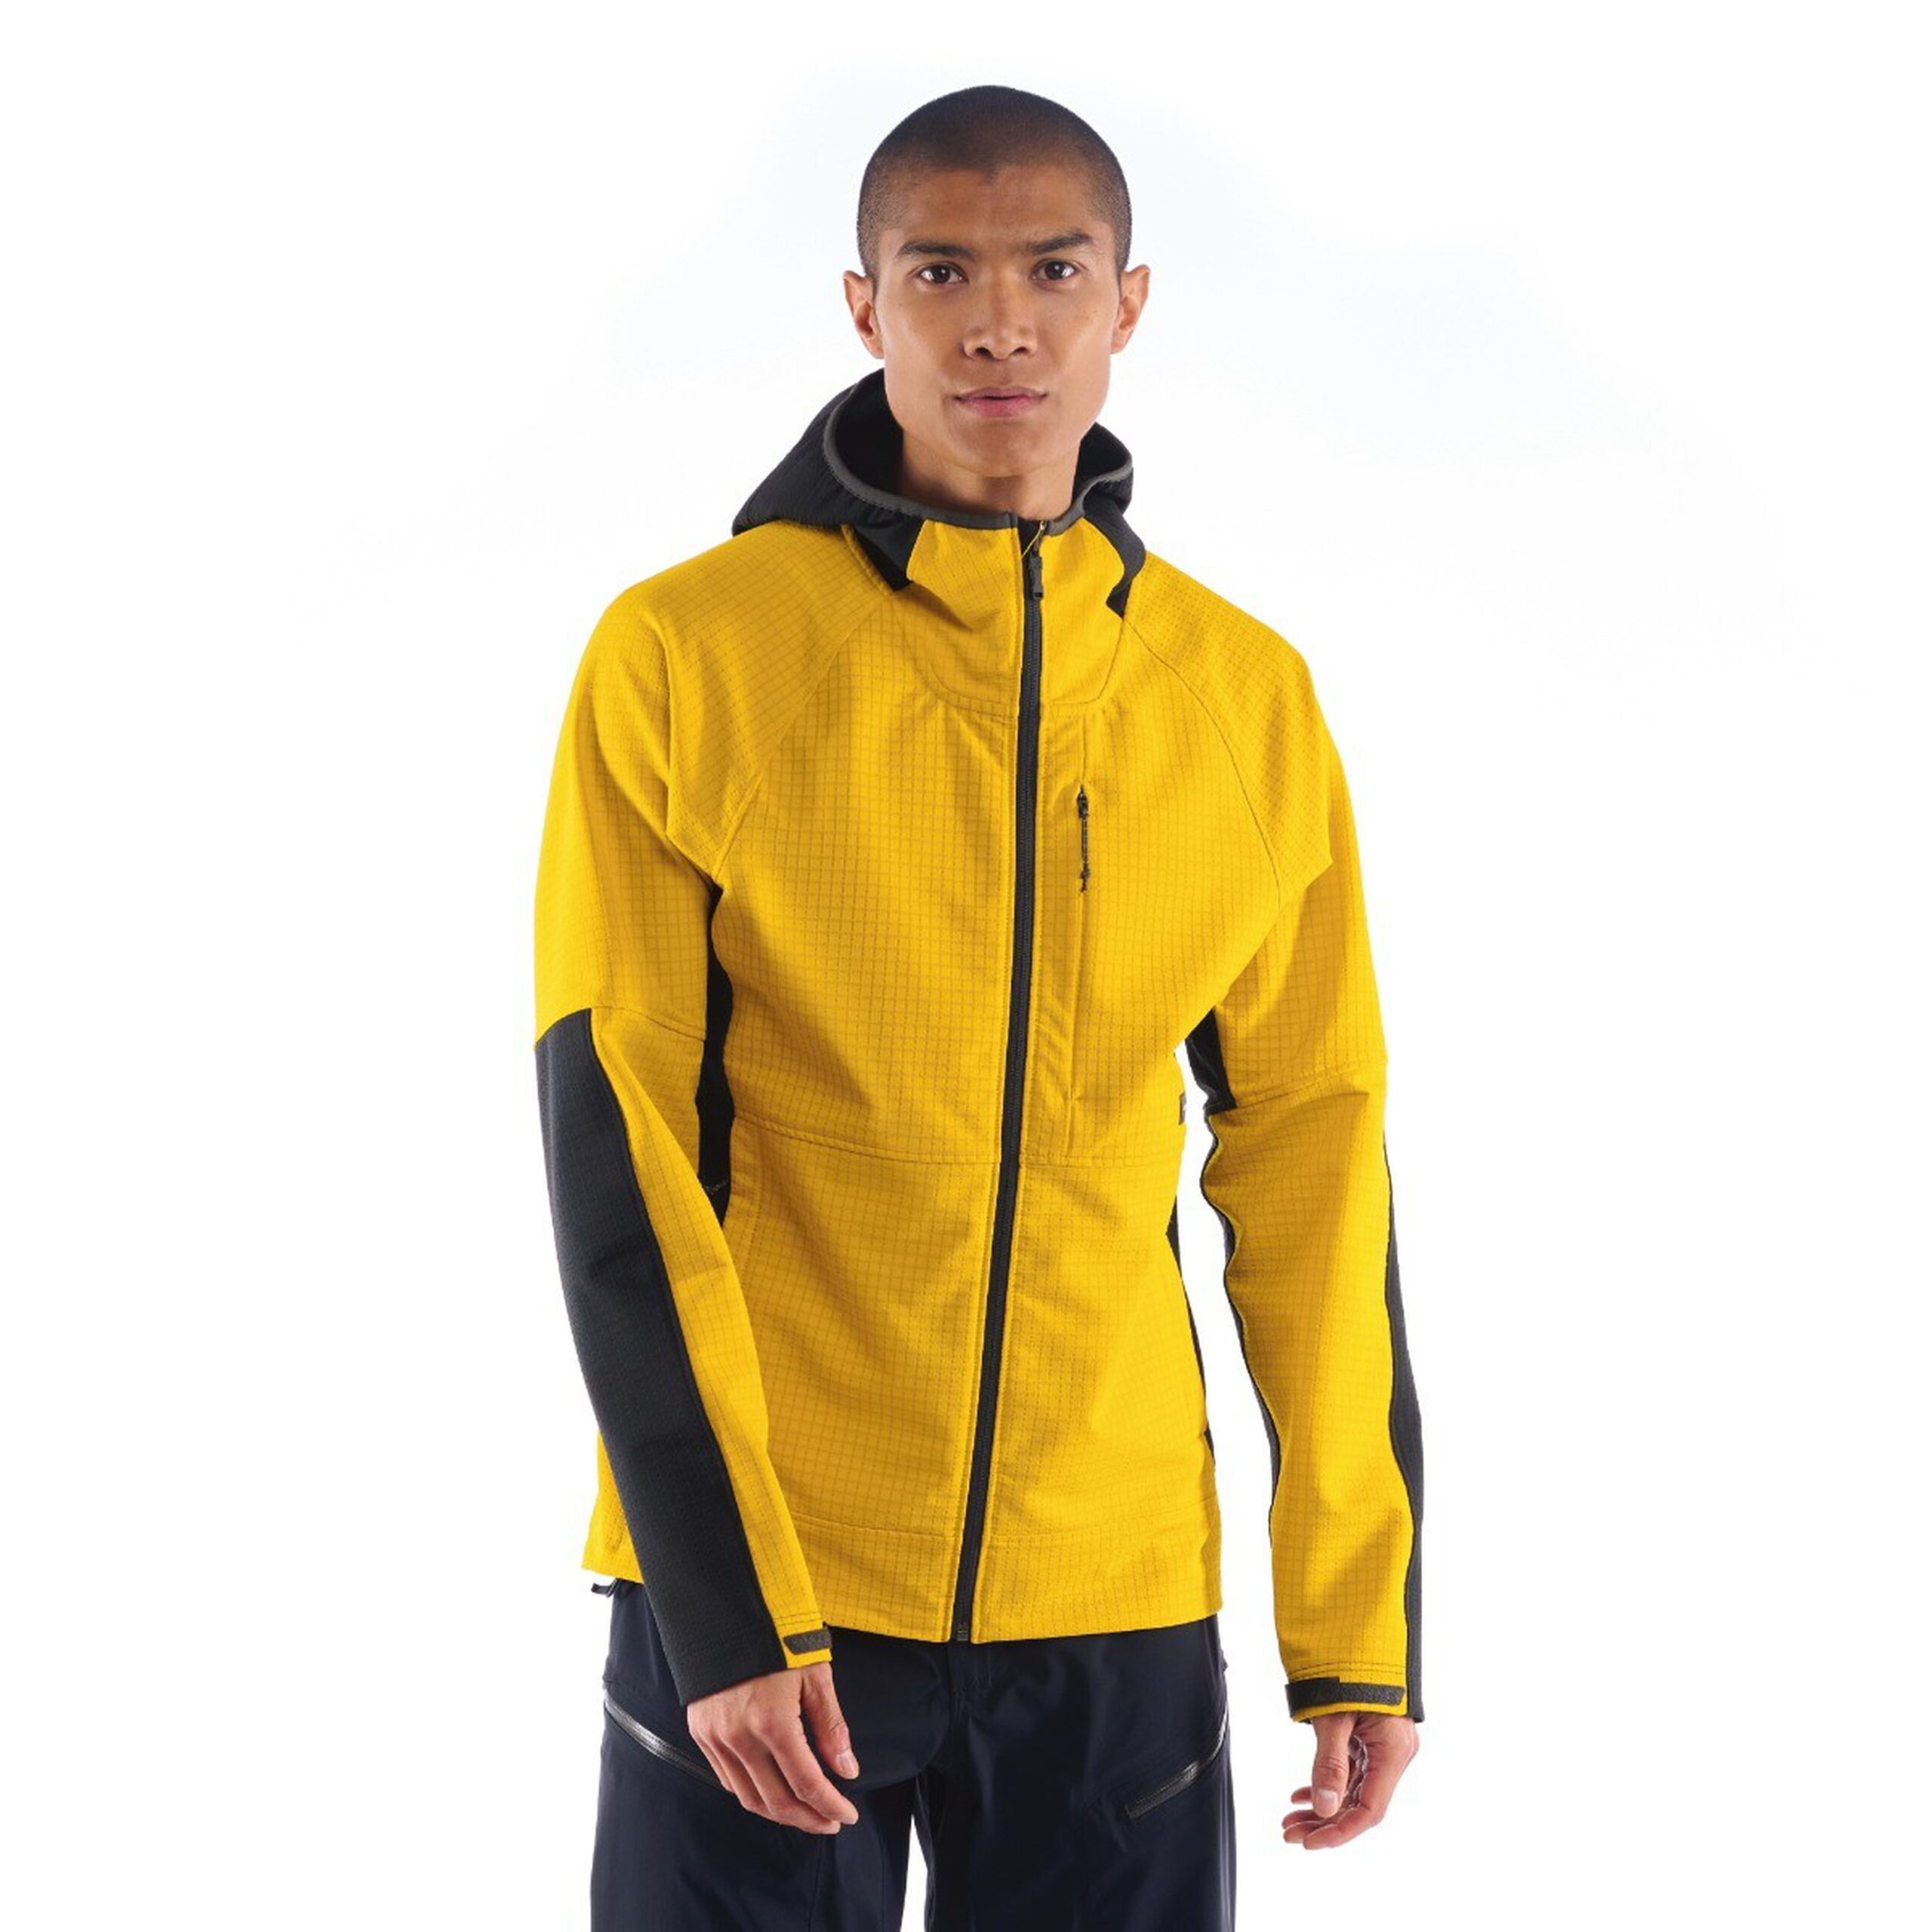 Haglöfs Teams Up With Polartec For New Mid-layer Co